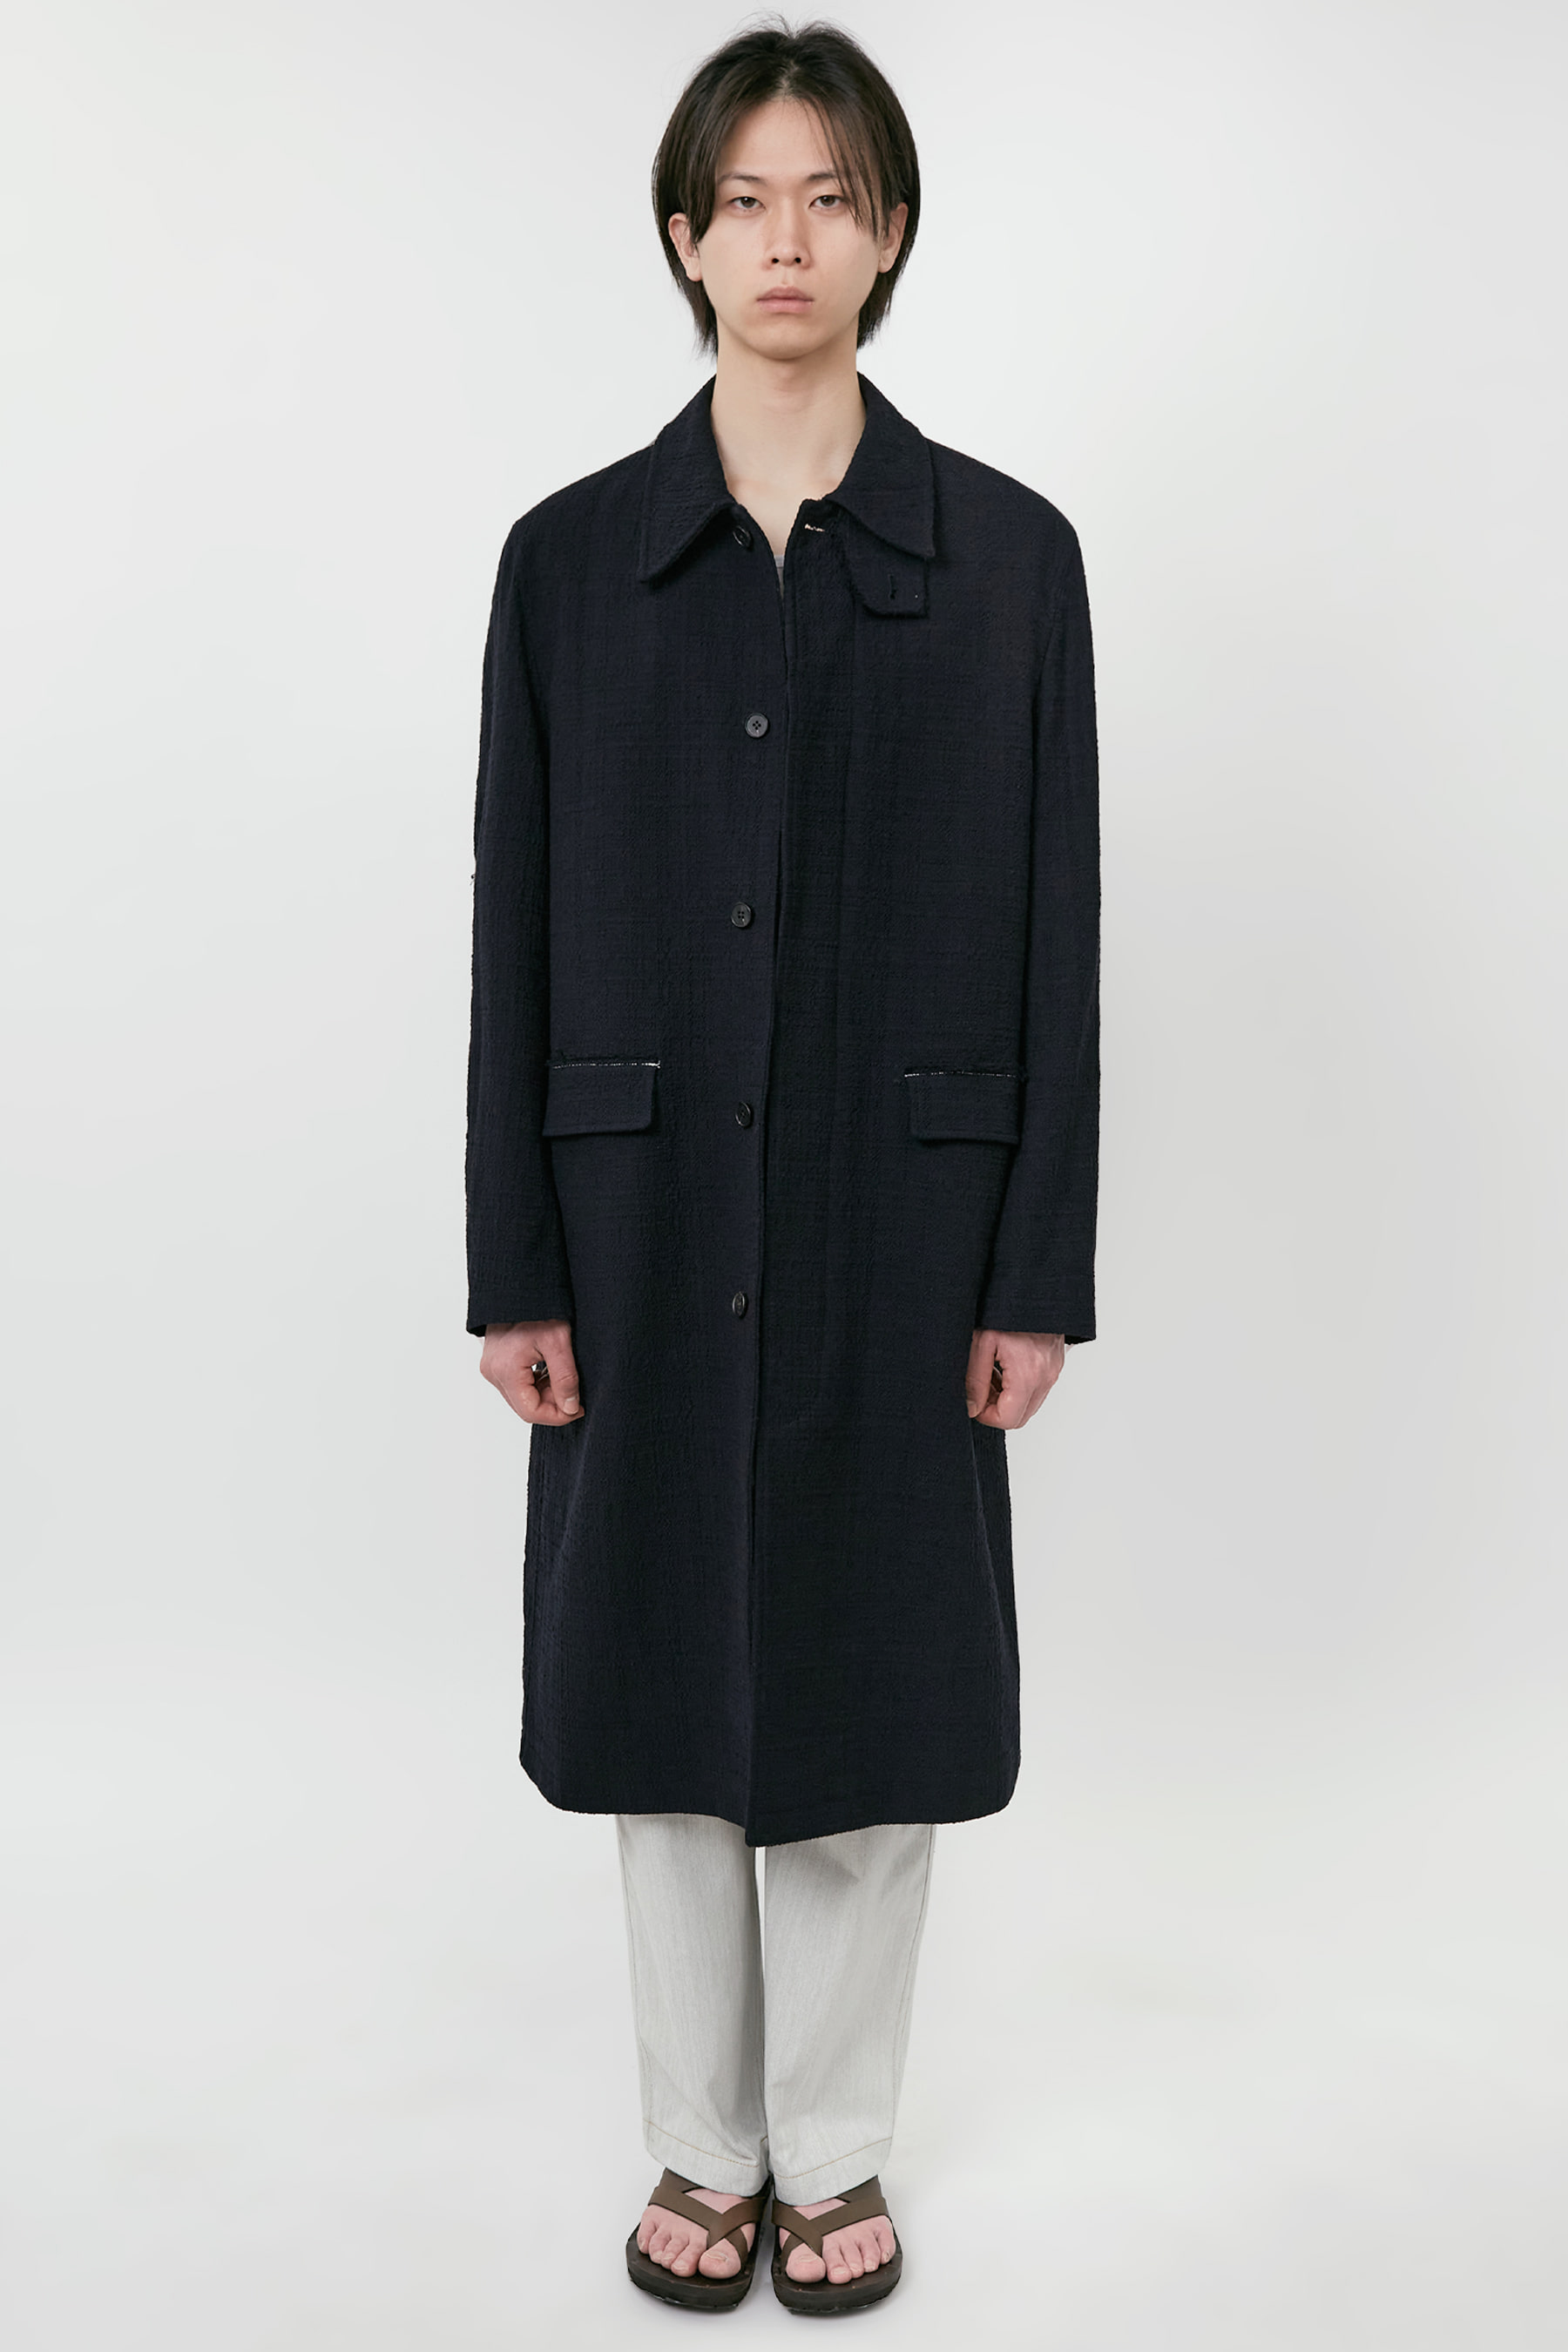 DARK NAVY ELBOW PATCH SINGLE BREASTED COAT